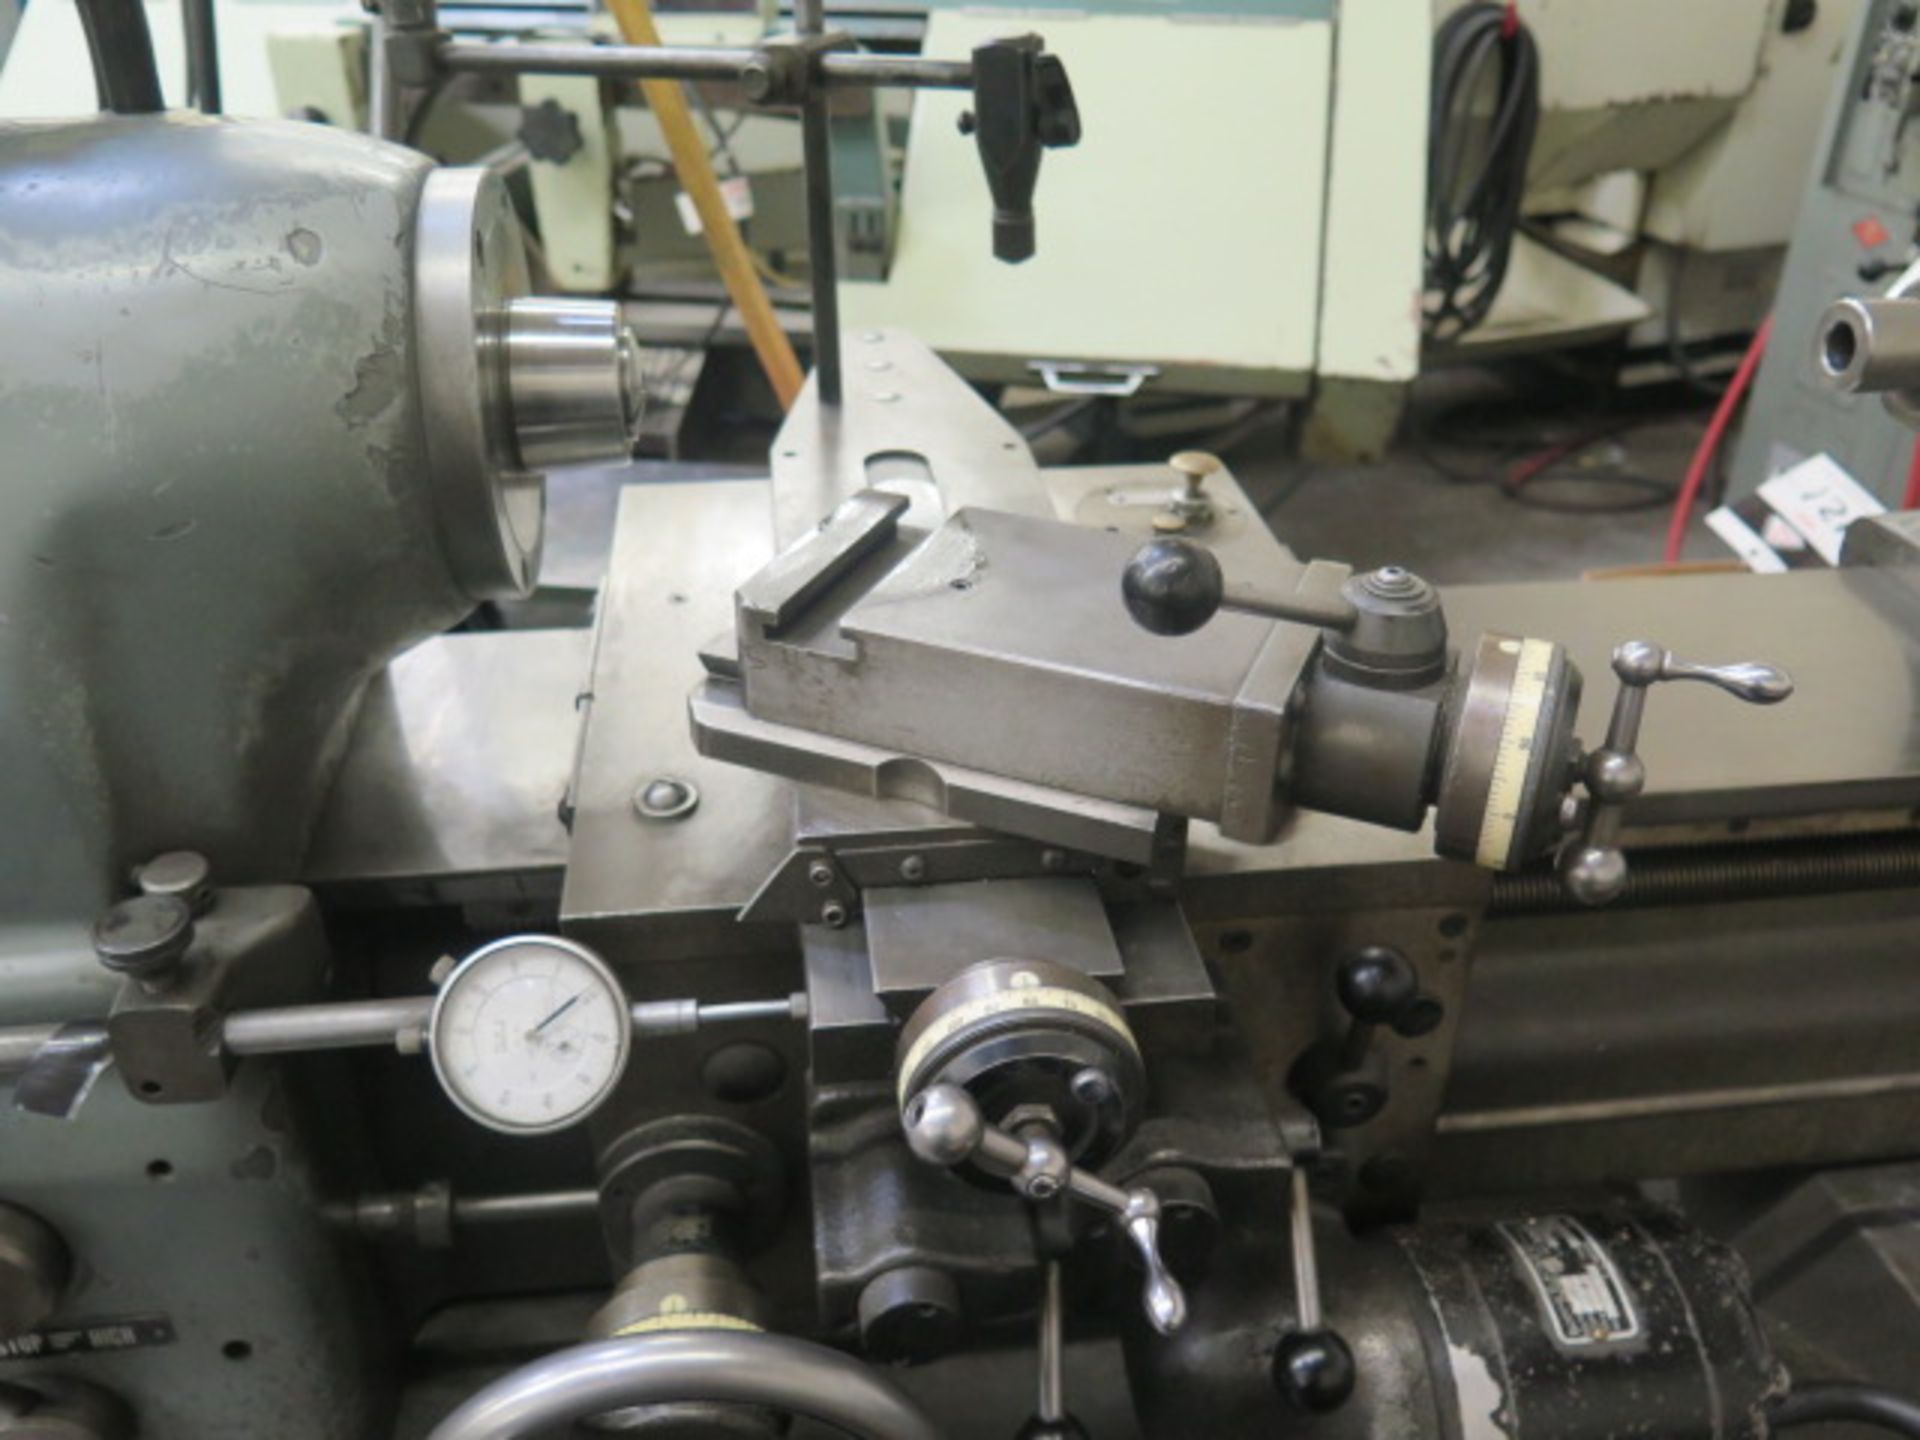 Hardinge HLV-H Tool Room Lathe s/n HLV-H-4836 w/ 125-3000 RPM, Inch Threading, Tailstock, SOLD AS IS - Image 5 of 14